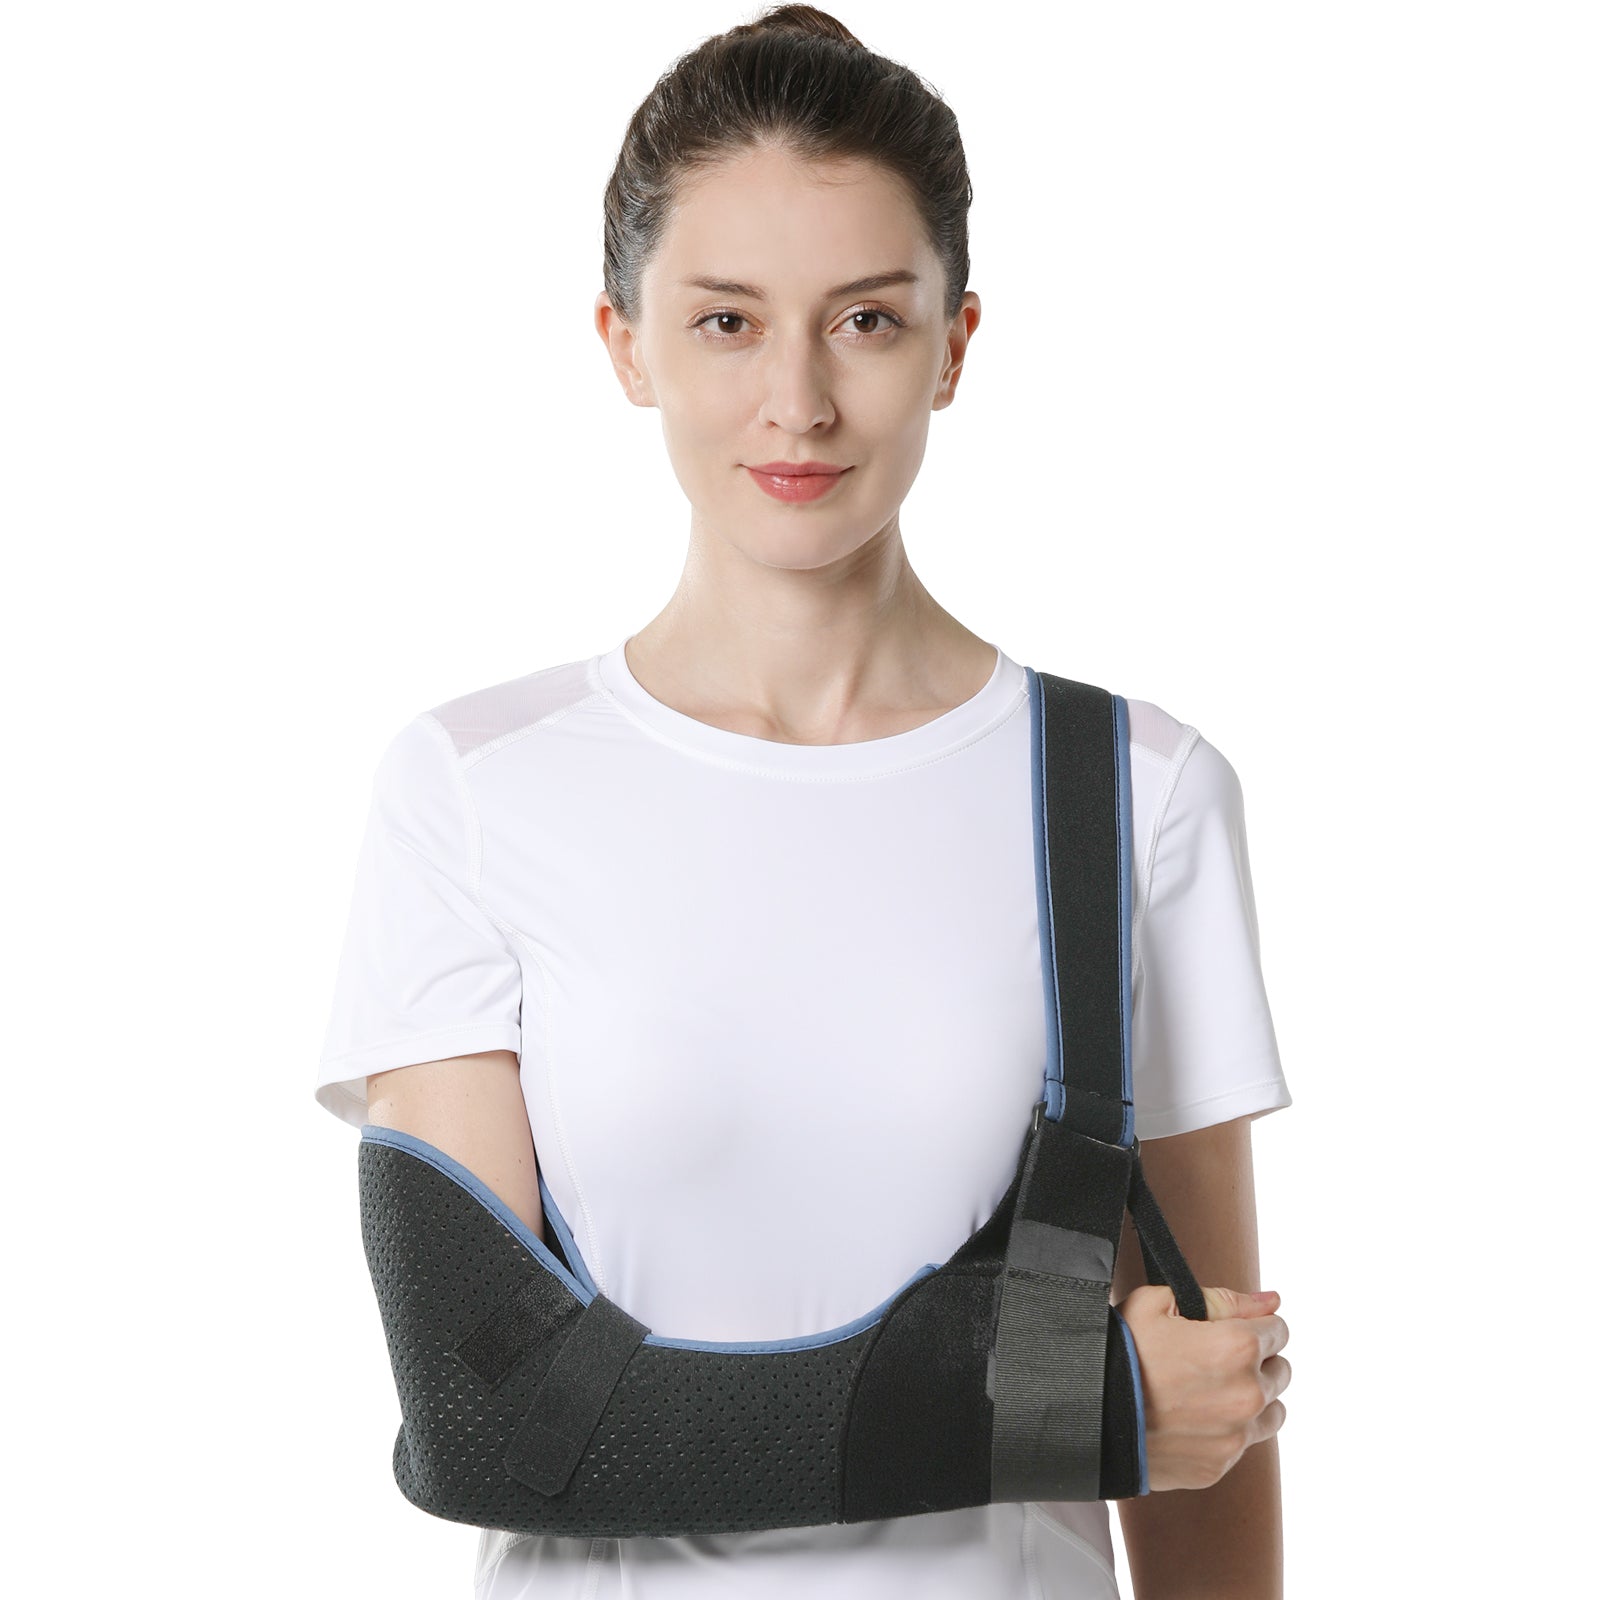 Velpeau Arm Support Sling Shoulder Immobilizer Rotator Cuff Use during Sleep  M